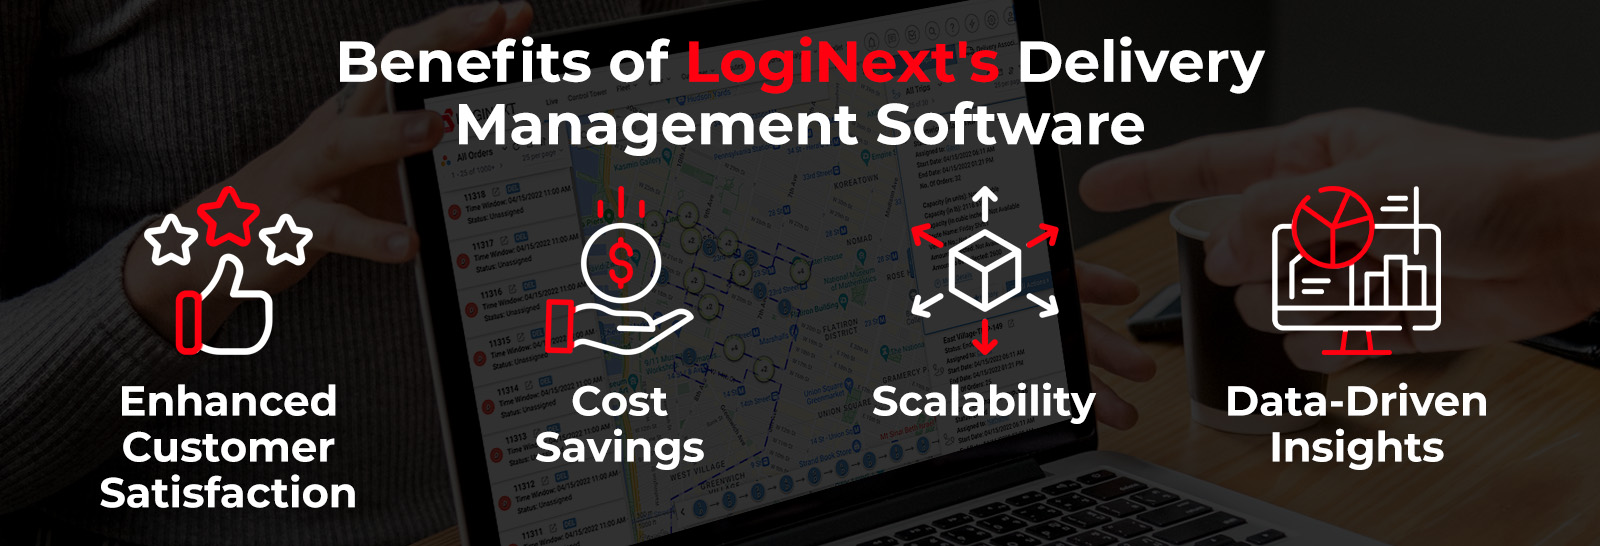 Benefits of LogiNext's Delivery Management Software